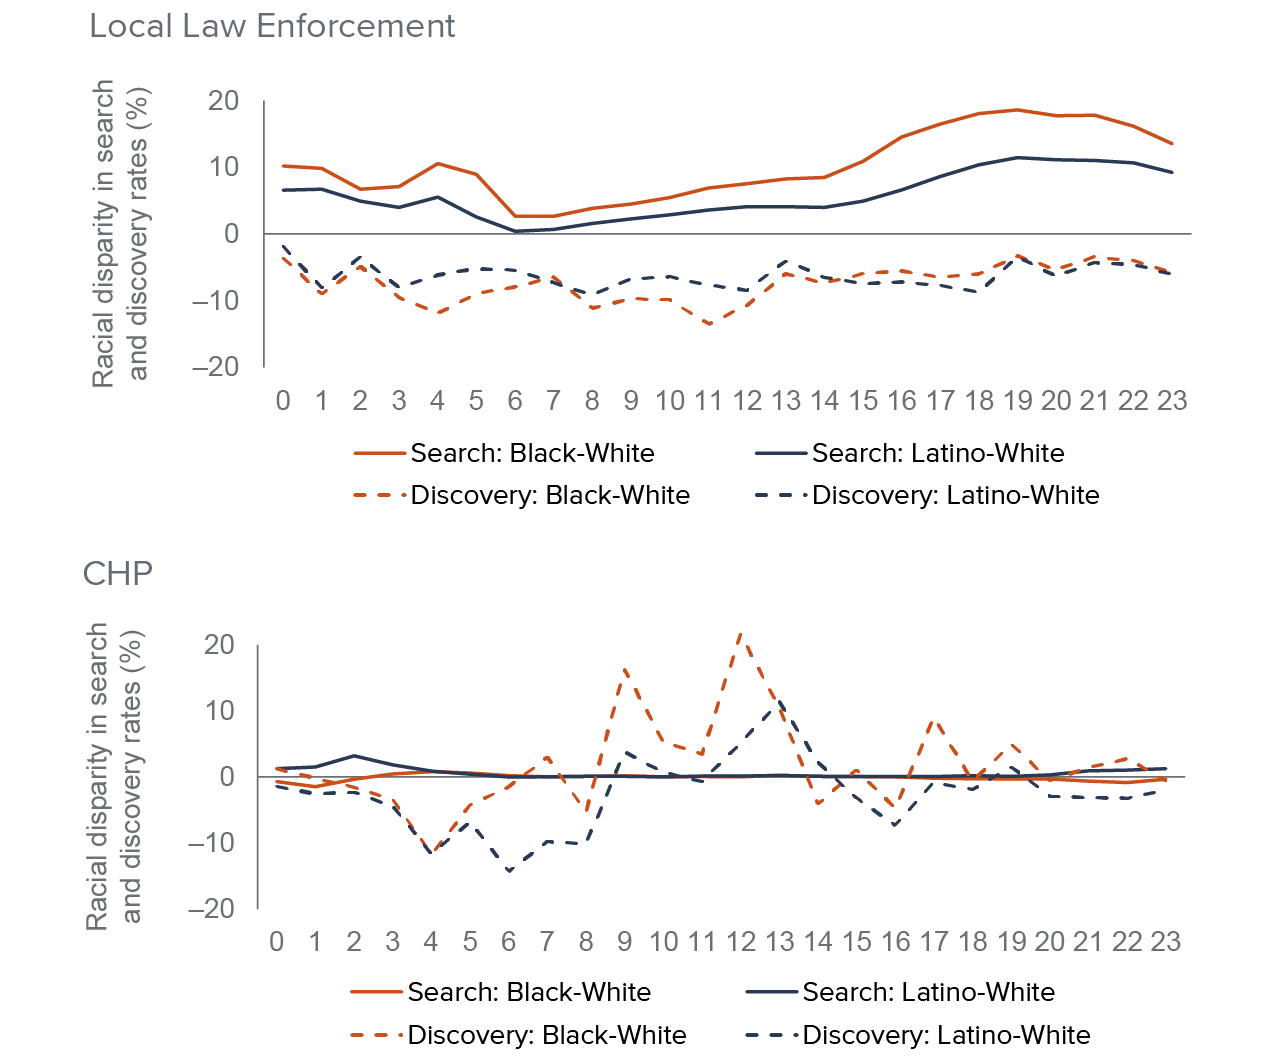 figure 6 - Racial disparities in search rates are highest in local LEA stops between 4 p.m. and midnight, but discovery rates are lower